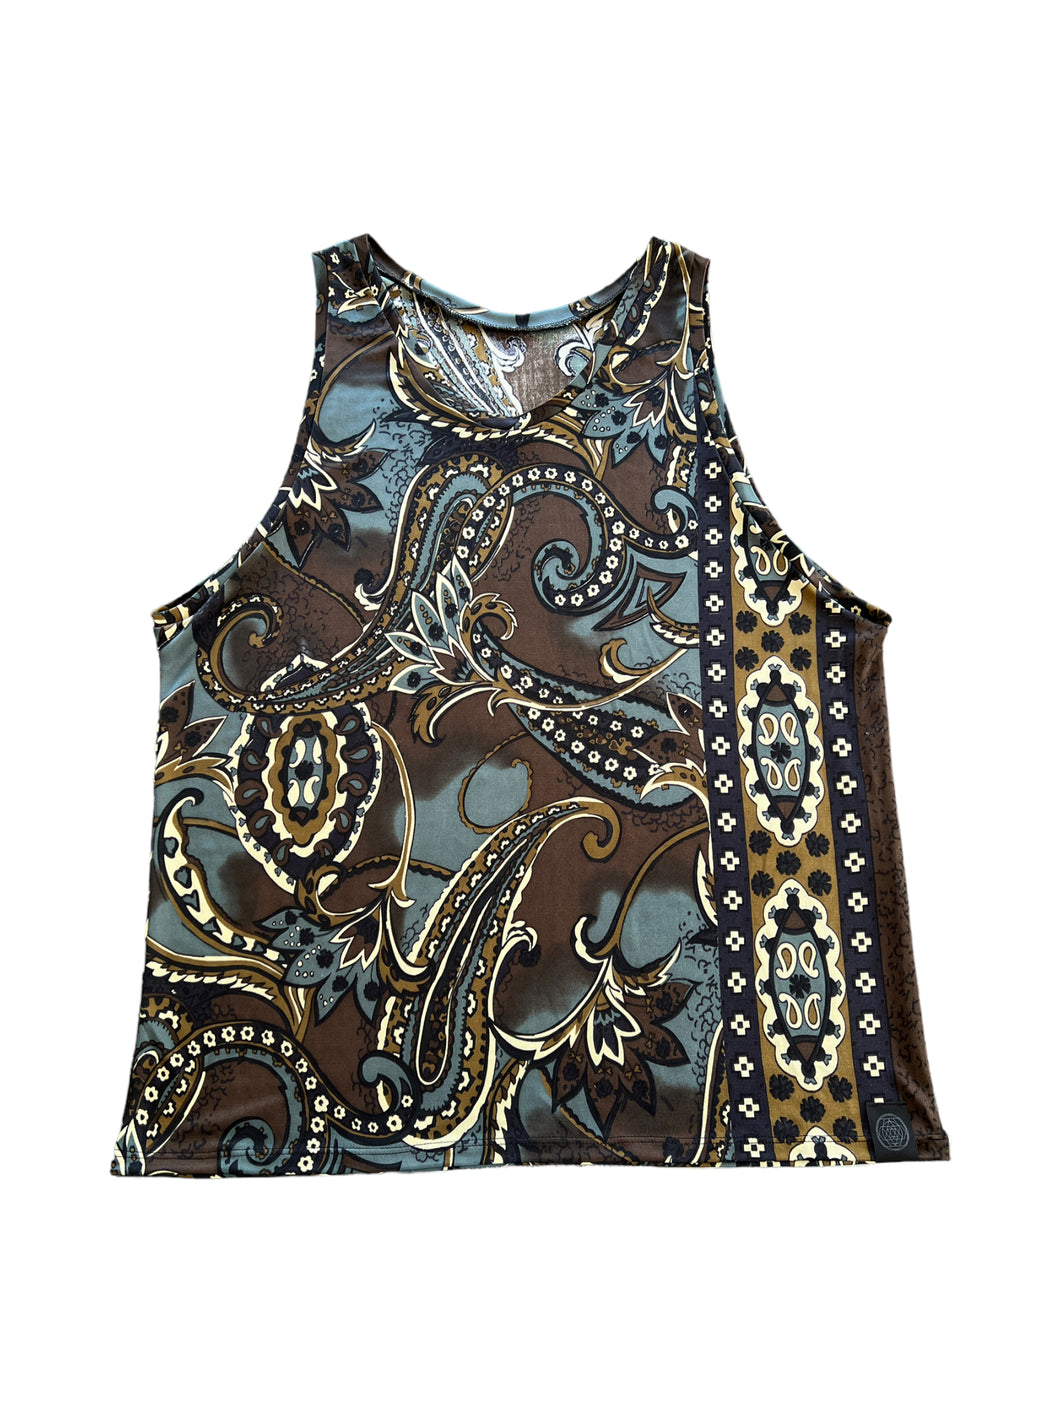 SILK PAISLEY TANK TOP (S-3XL available)